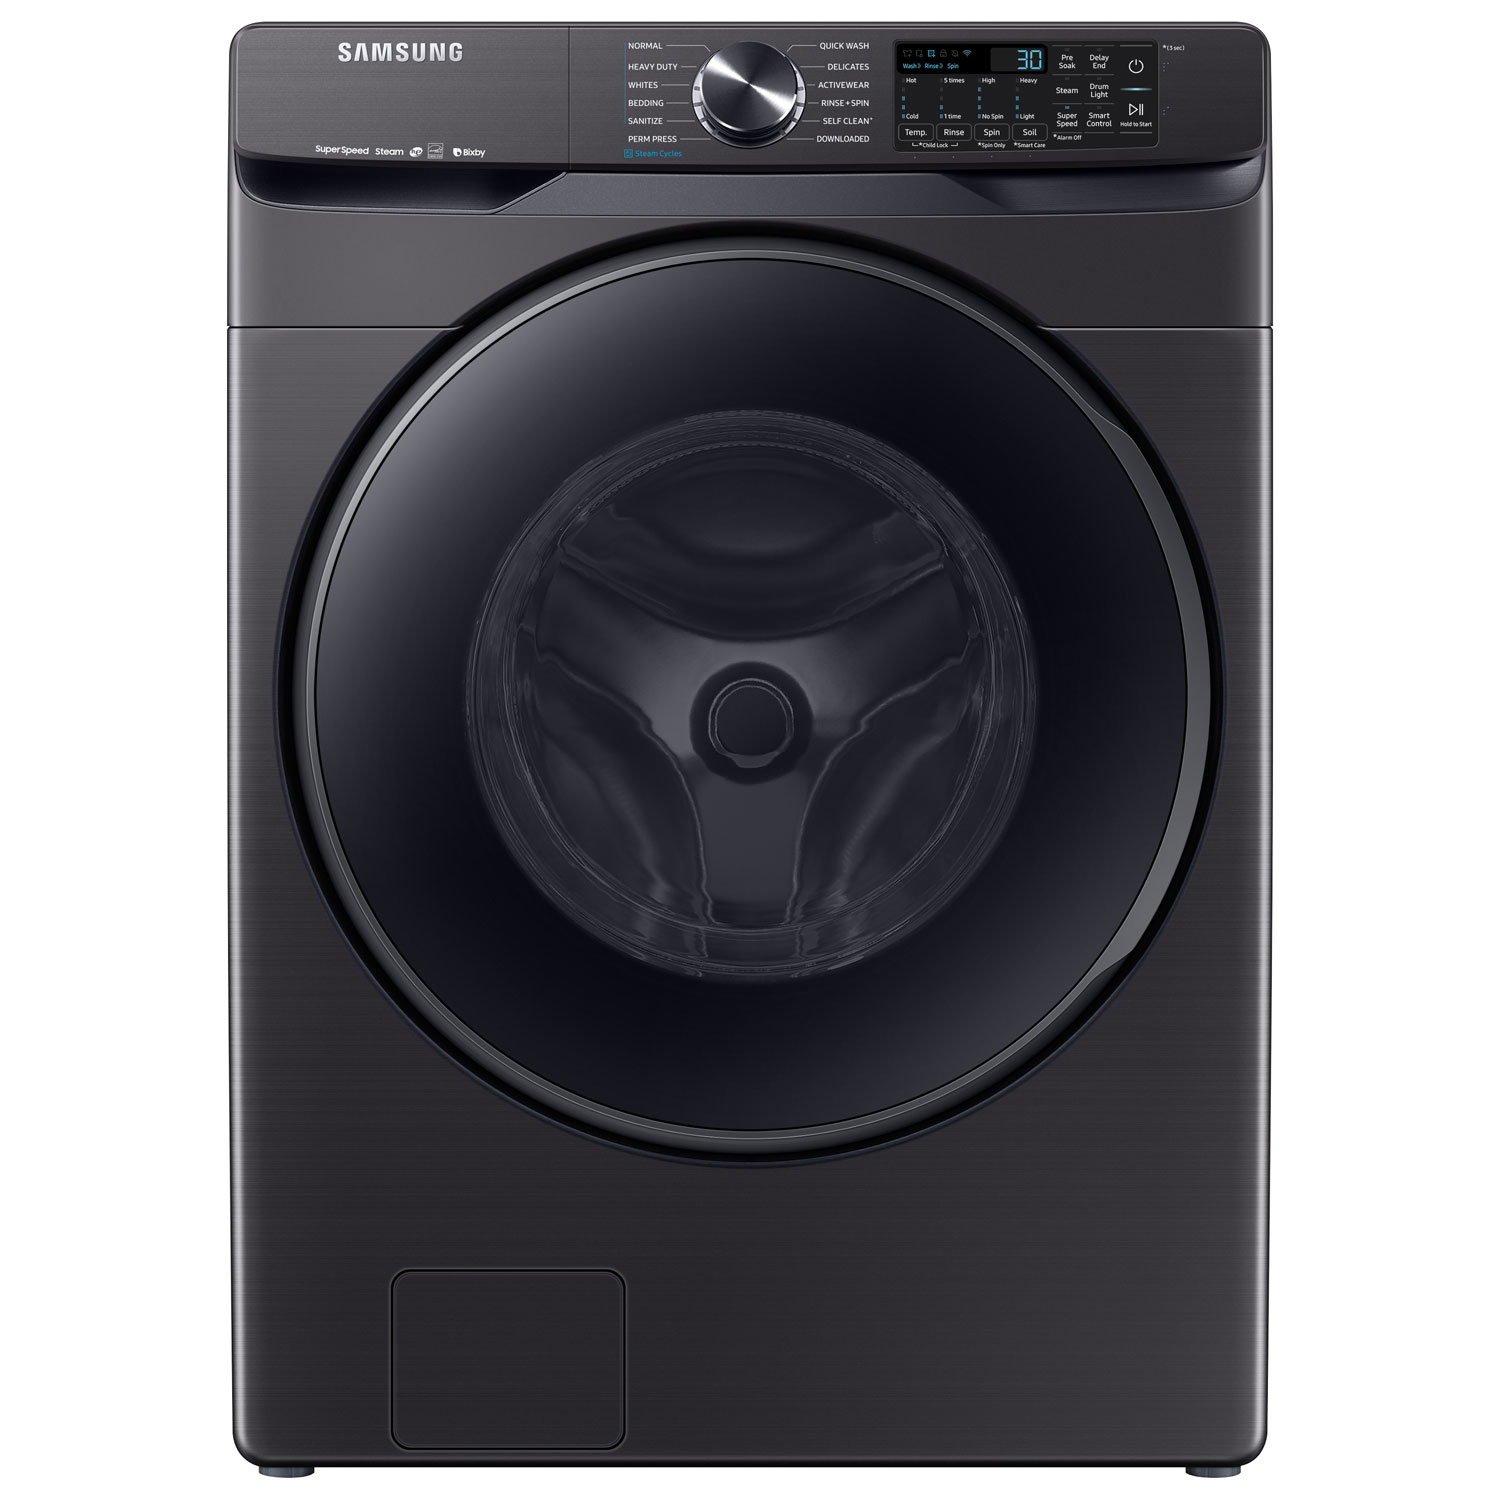 Samsung 5.8 Cu. Ft. Front Load Steam Washer (WF50T8500AV/A5) - Black Stainless